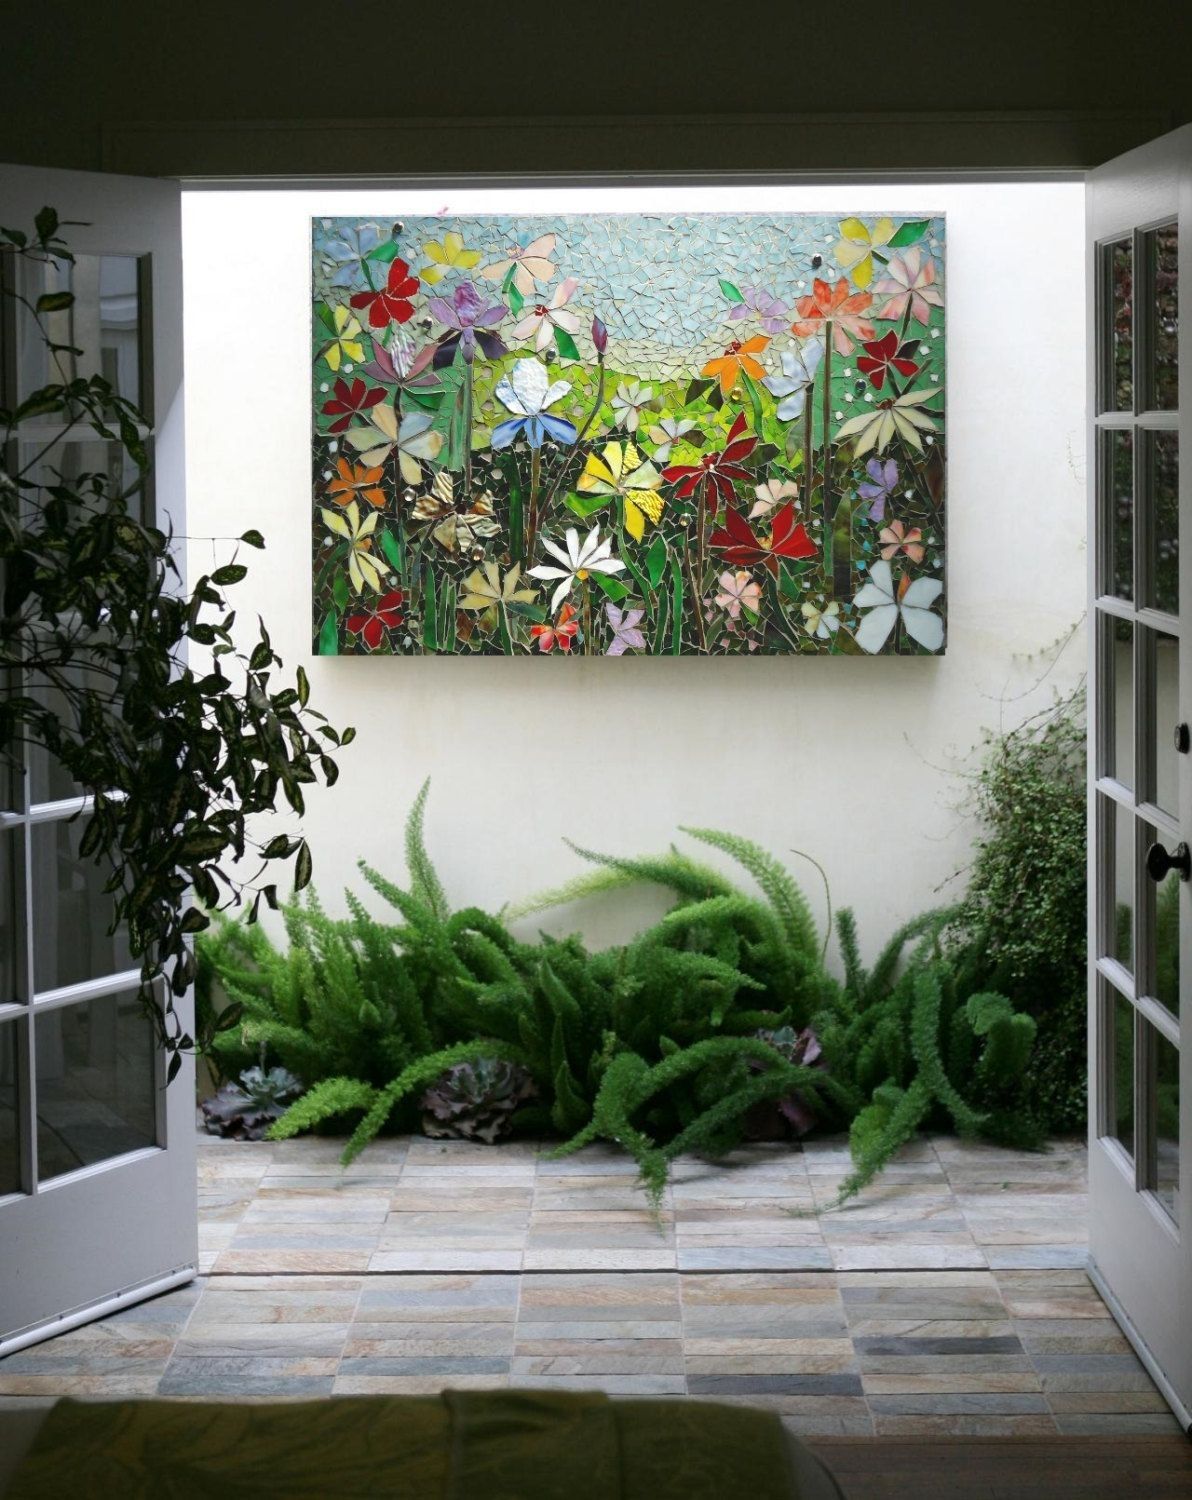 Mosaic Wall Art Stained Glass Wall Decor Floral Garden Indoor Pertaining To Garden Wall Art (View 14 of 20)